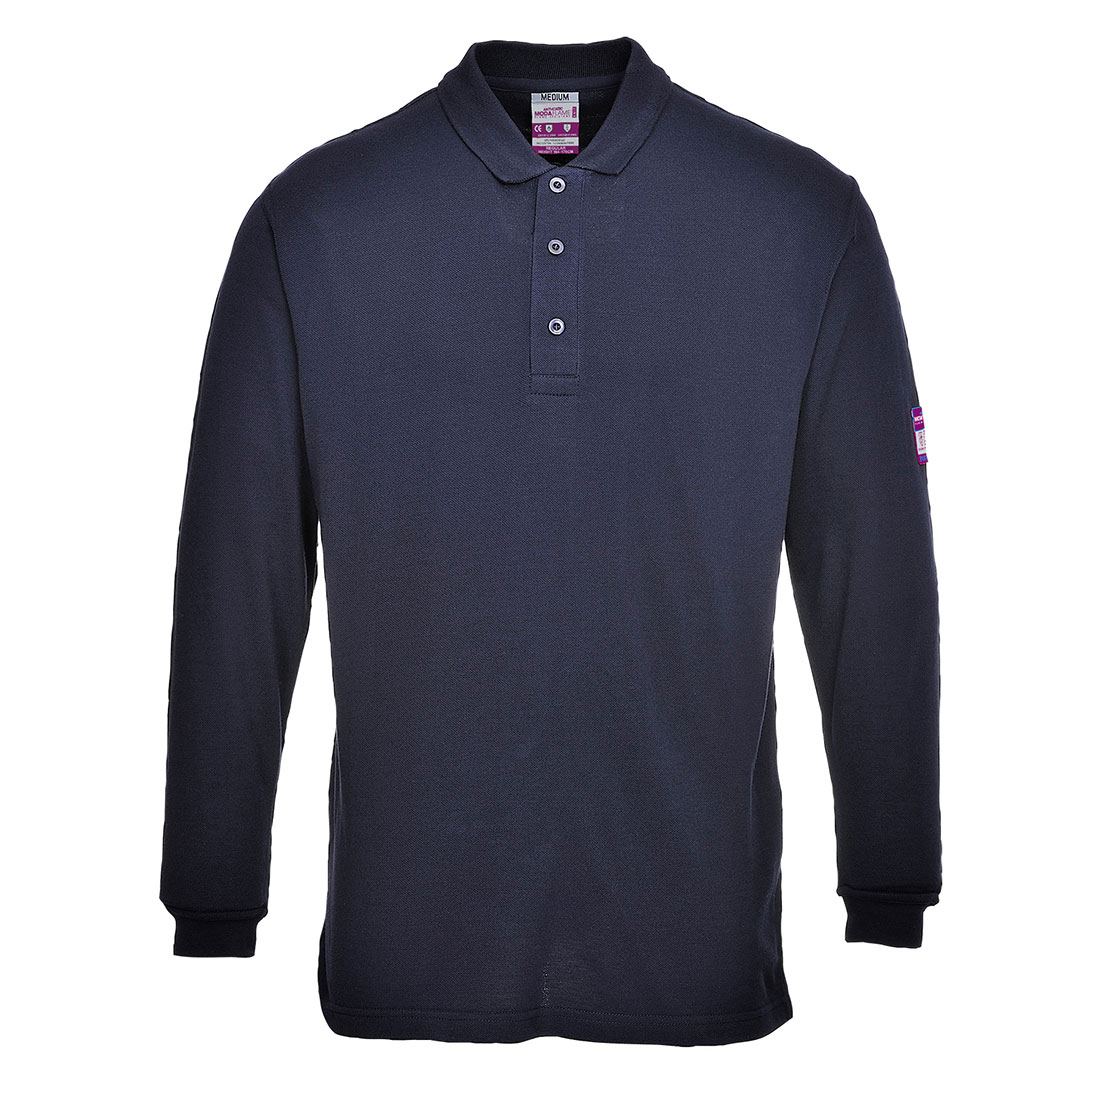 Flame Resistant Anti-Static Comfrtable Soft Long Sleeve Polo Shirt